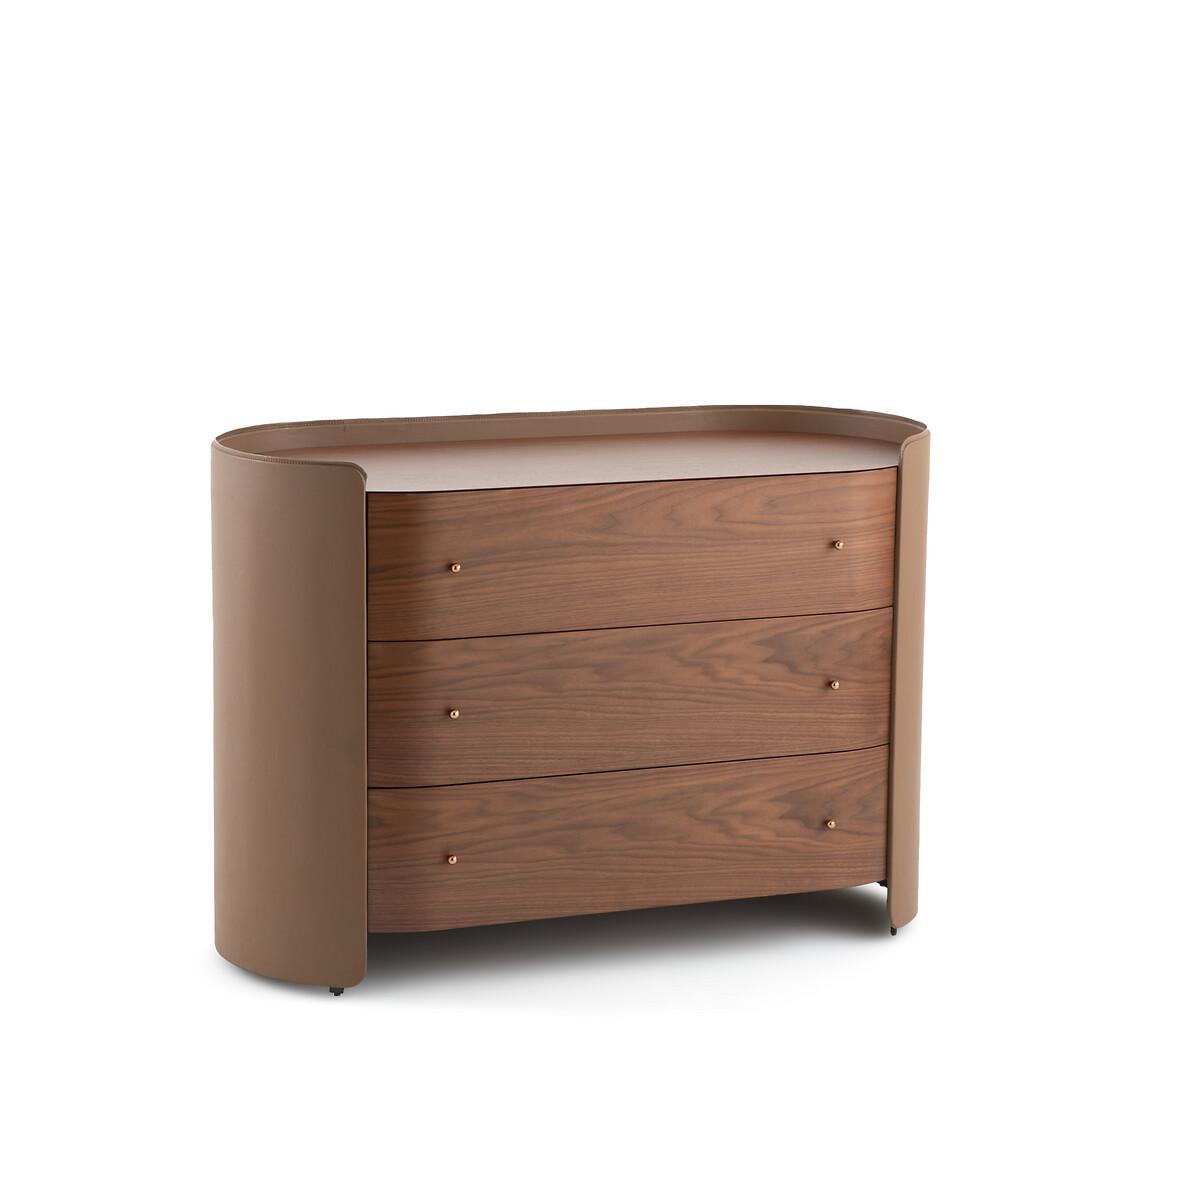 AM.PM Commode noyer/cuir  